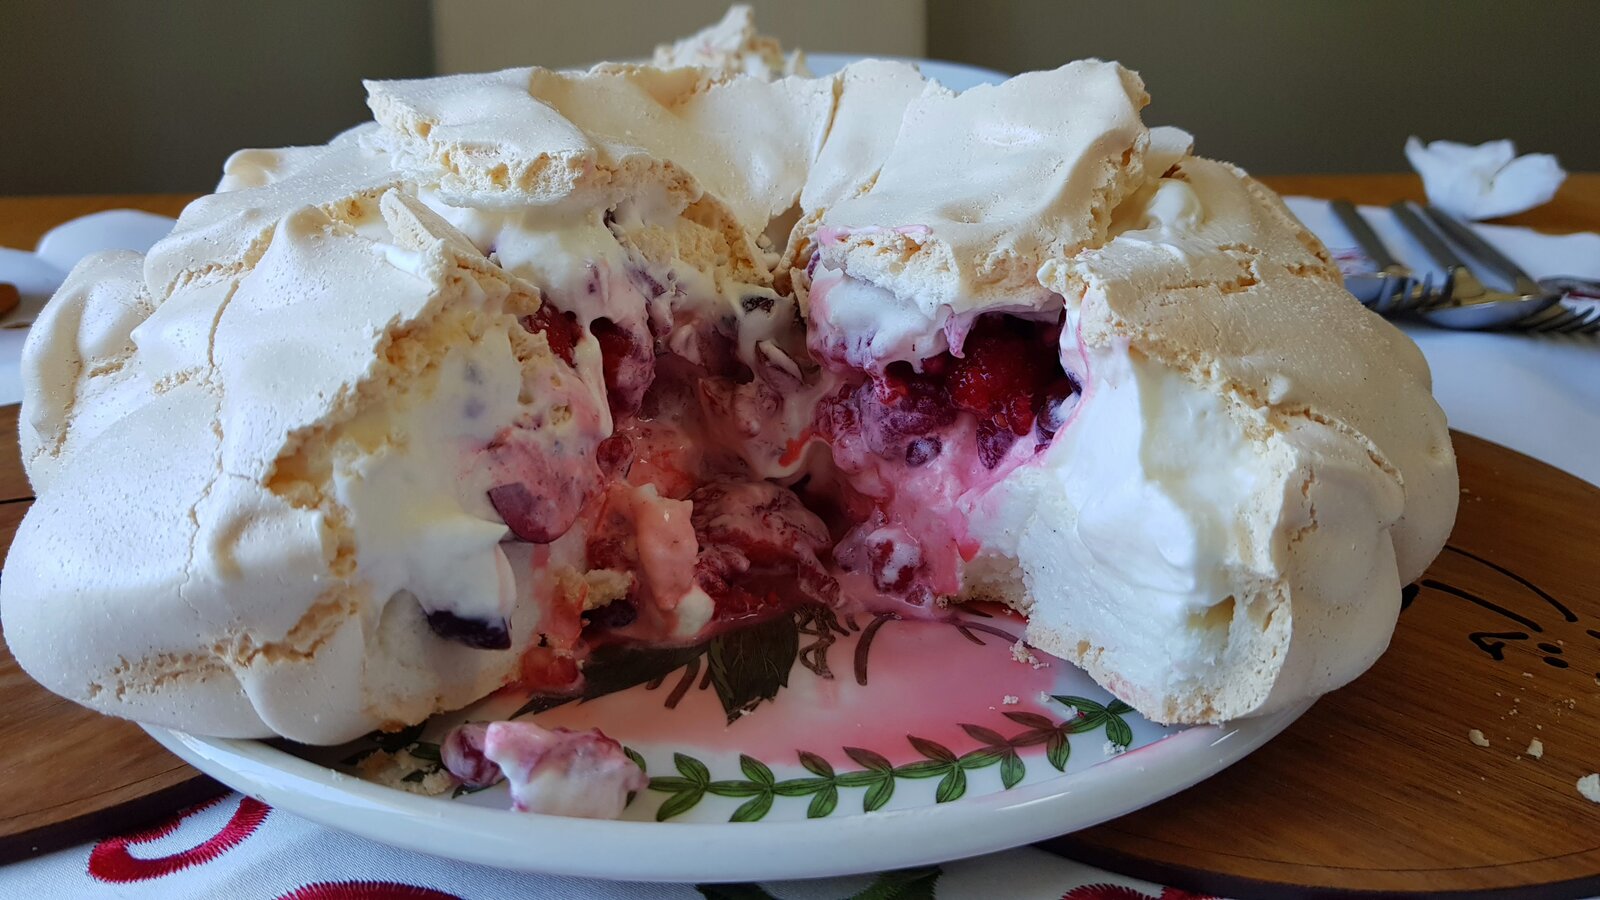 The pavlova with whipped cream and red berries (dairy free)